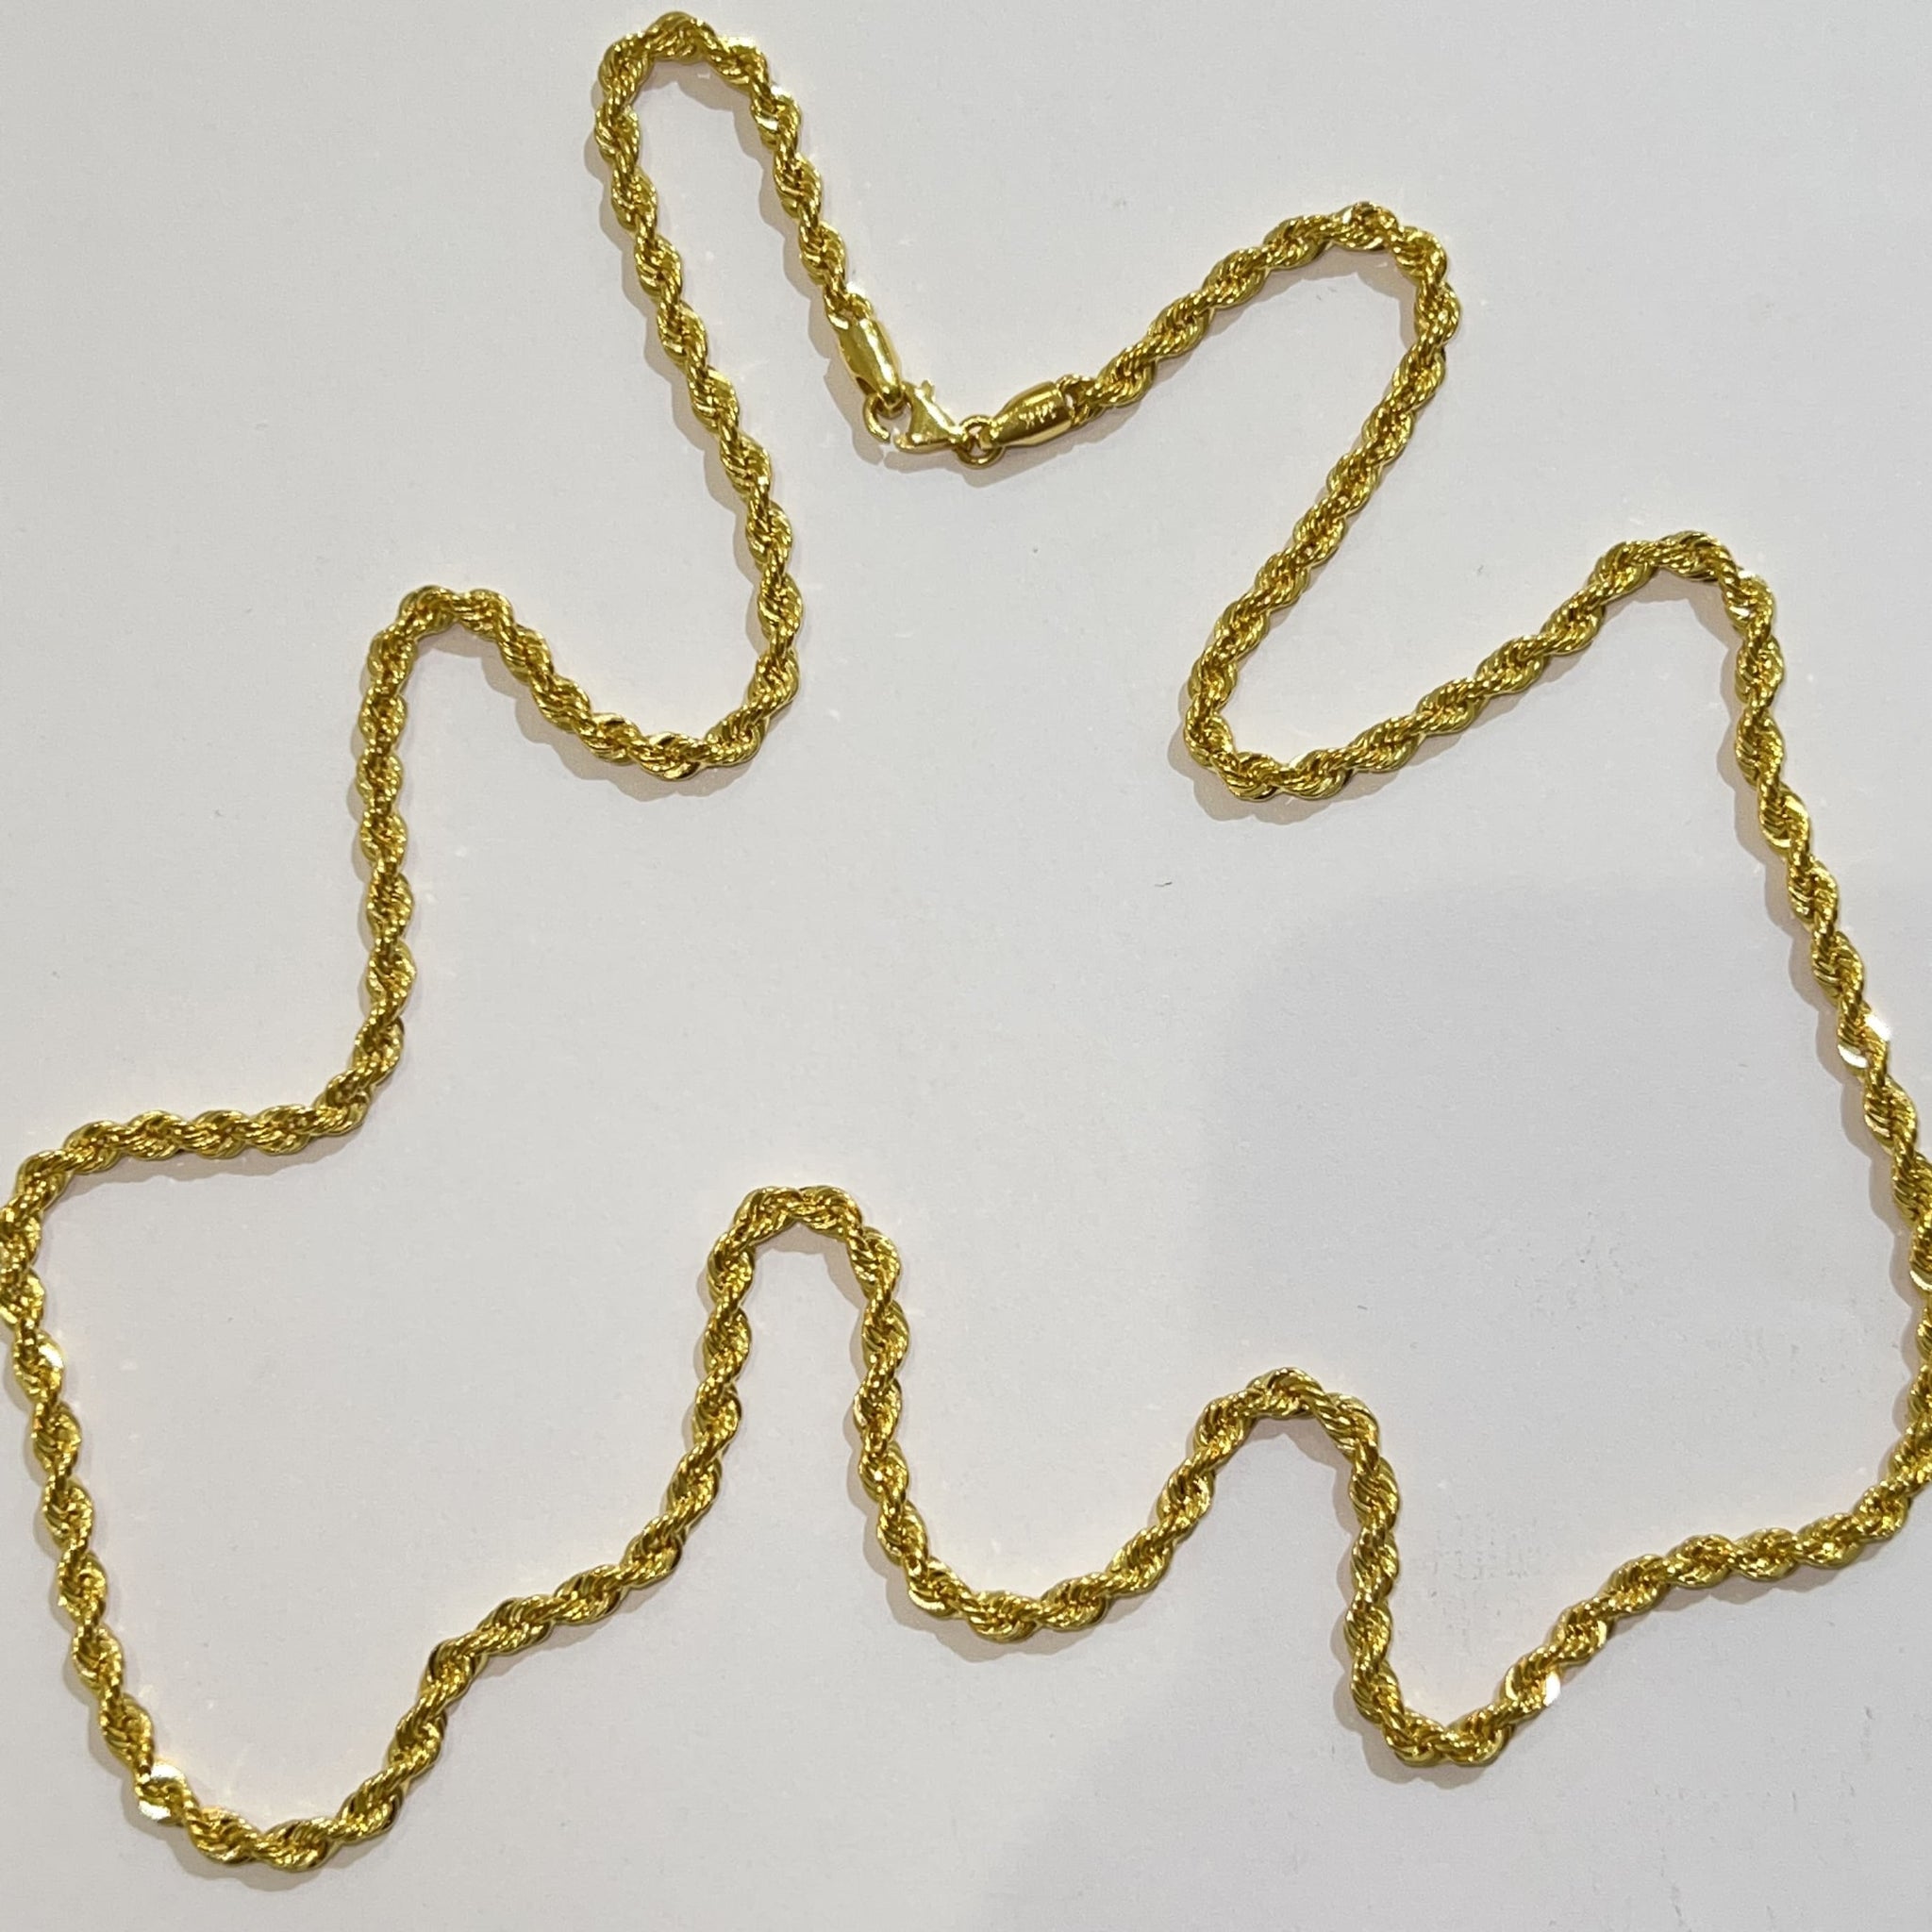 Rope Chain - 14 carat gold - 3.2mm / 60cm